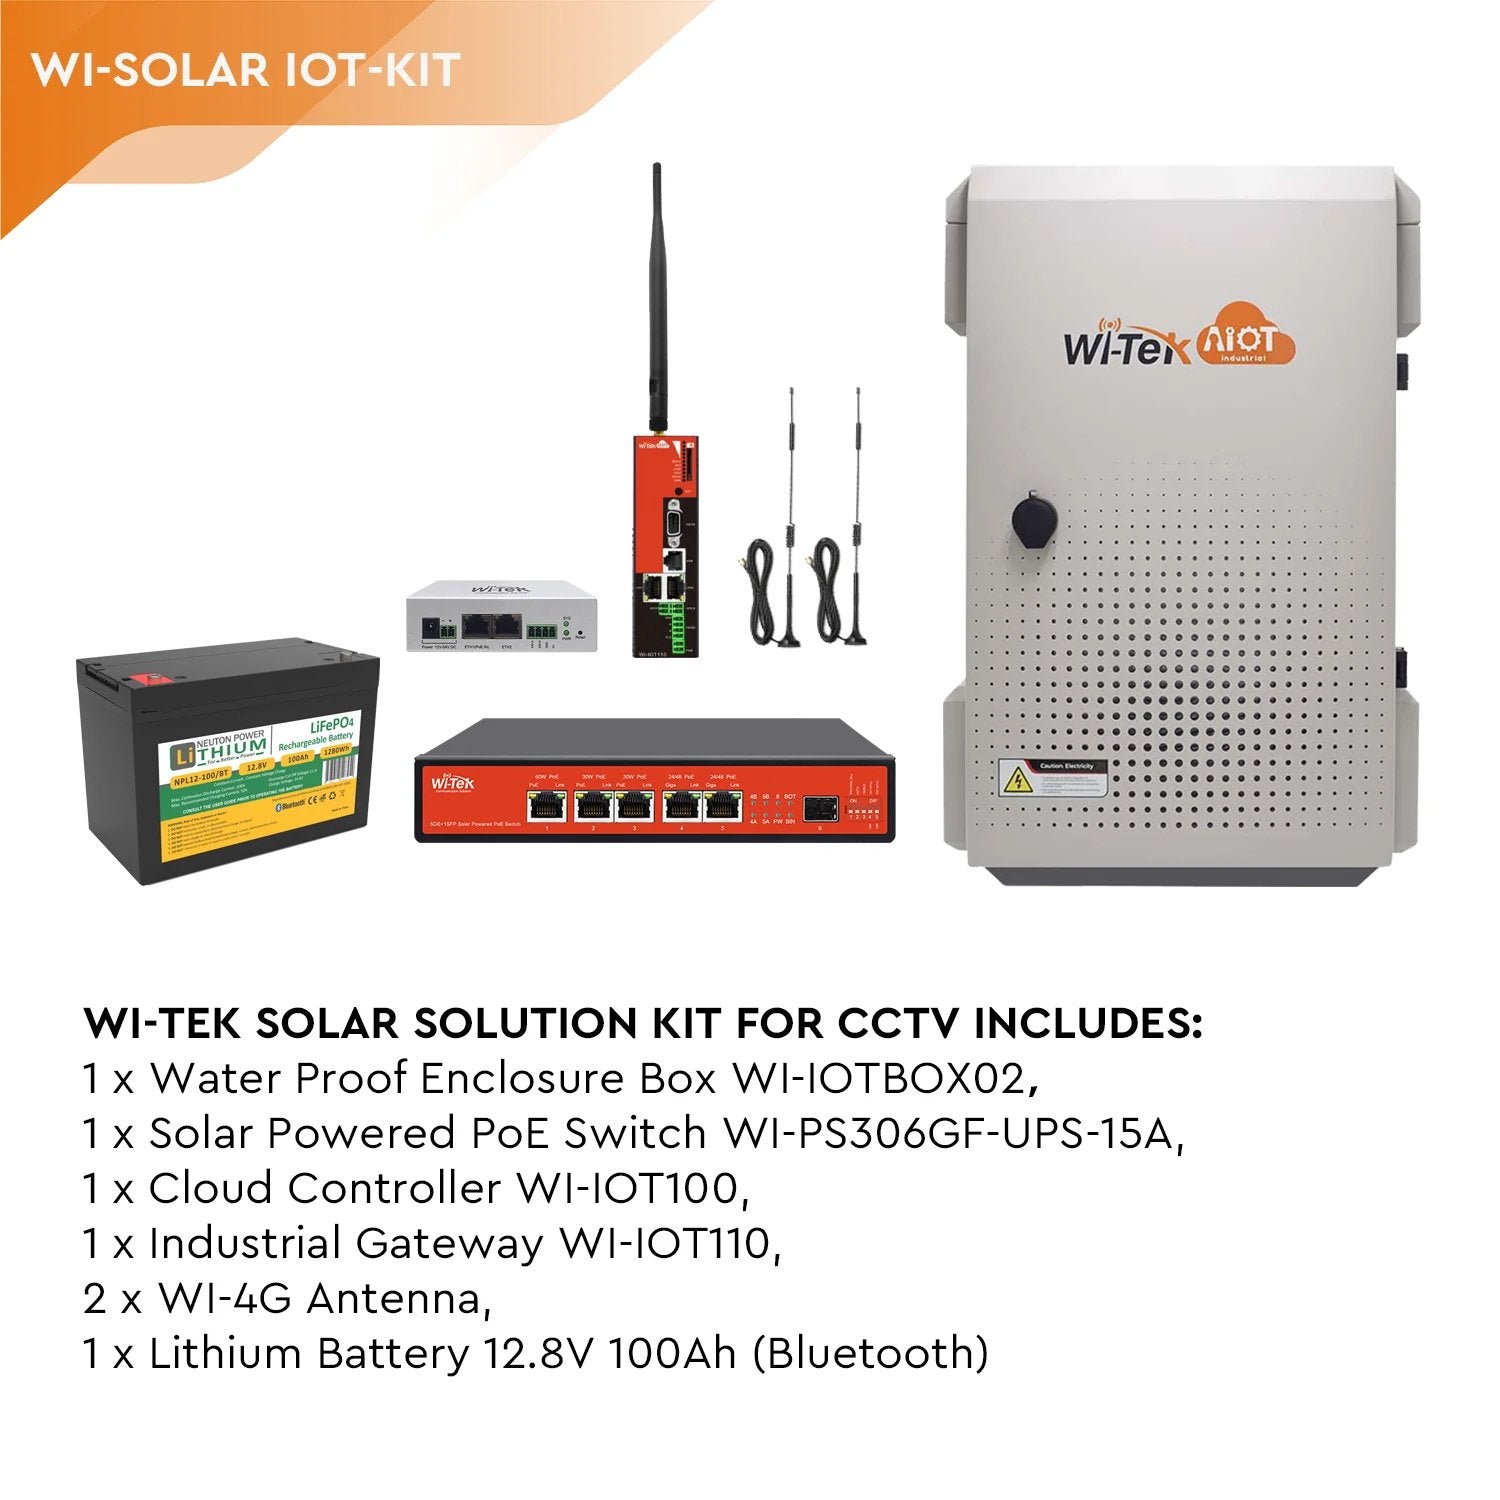 Wi-Tek IOT Backbone Devices Solar Kit - 1280Wh LiFePo4 12.8V 100Ah Battery, 1x WI-PS306GF-UPS-15A 5-Port Outdoor Solar POE Switch, 1x WI-IOT100 Cloud Controller, 1x WI-IOT110 Industrial Gateway, 2x WI-4G Antenna